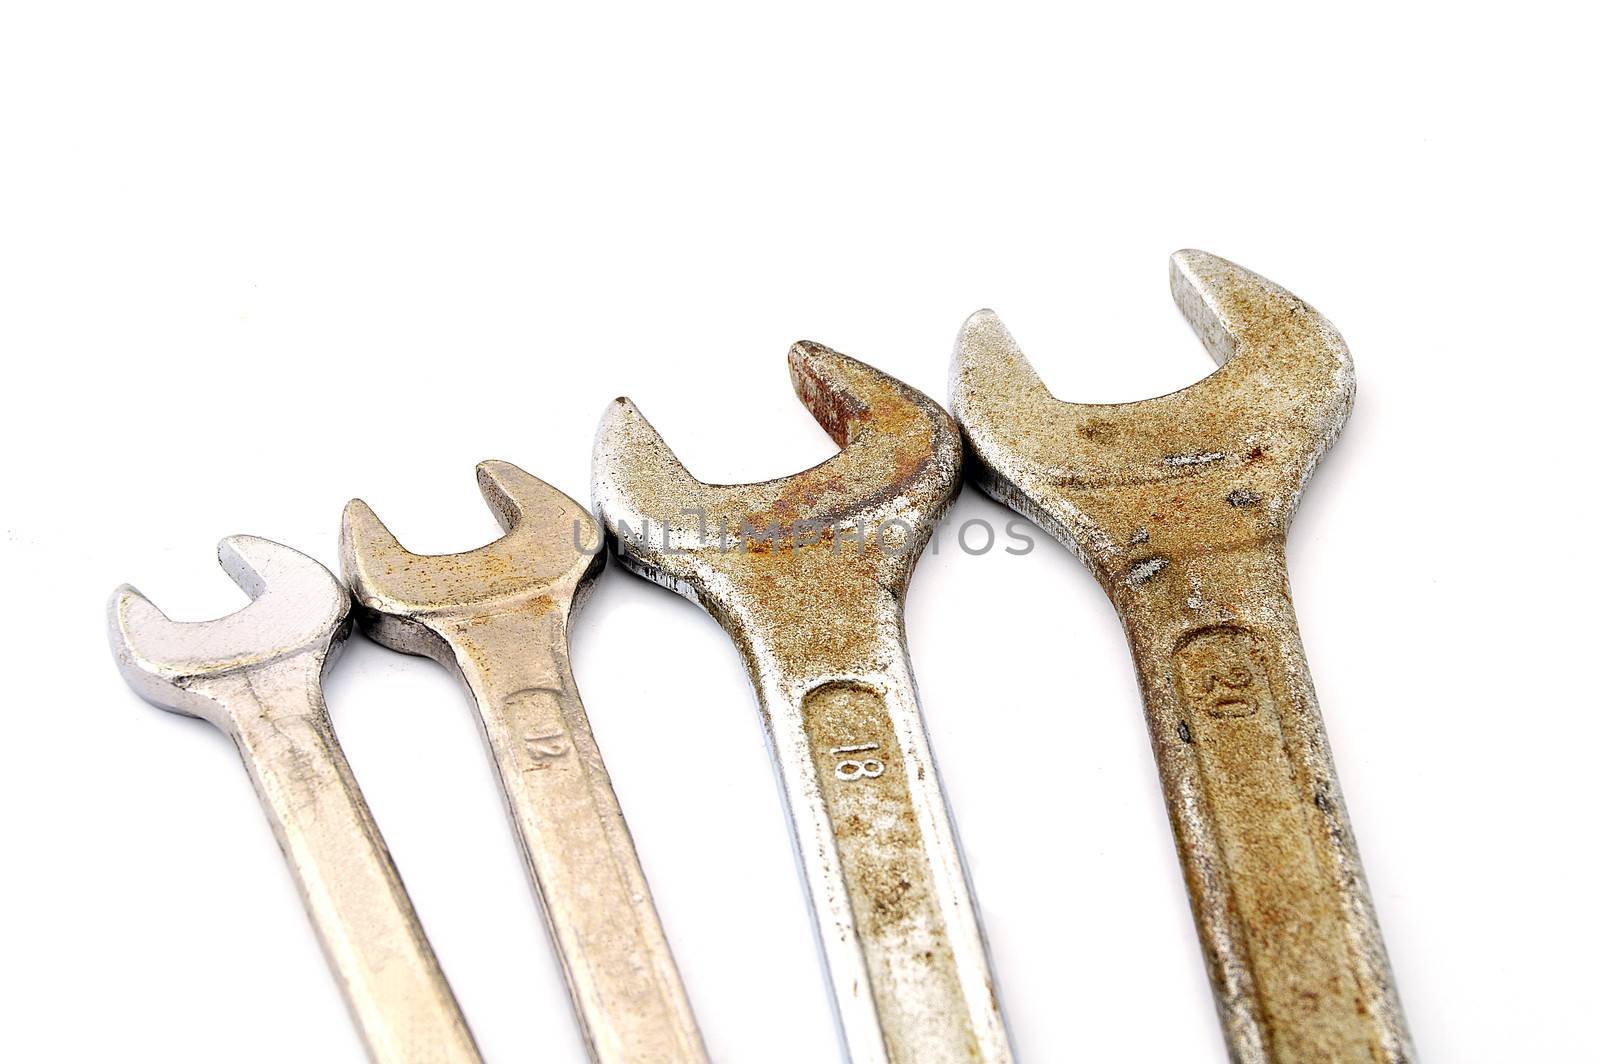  various sizes of old wrenches by Lekchangply